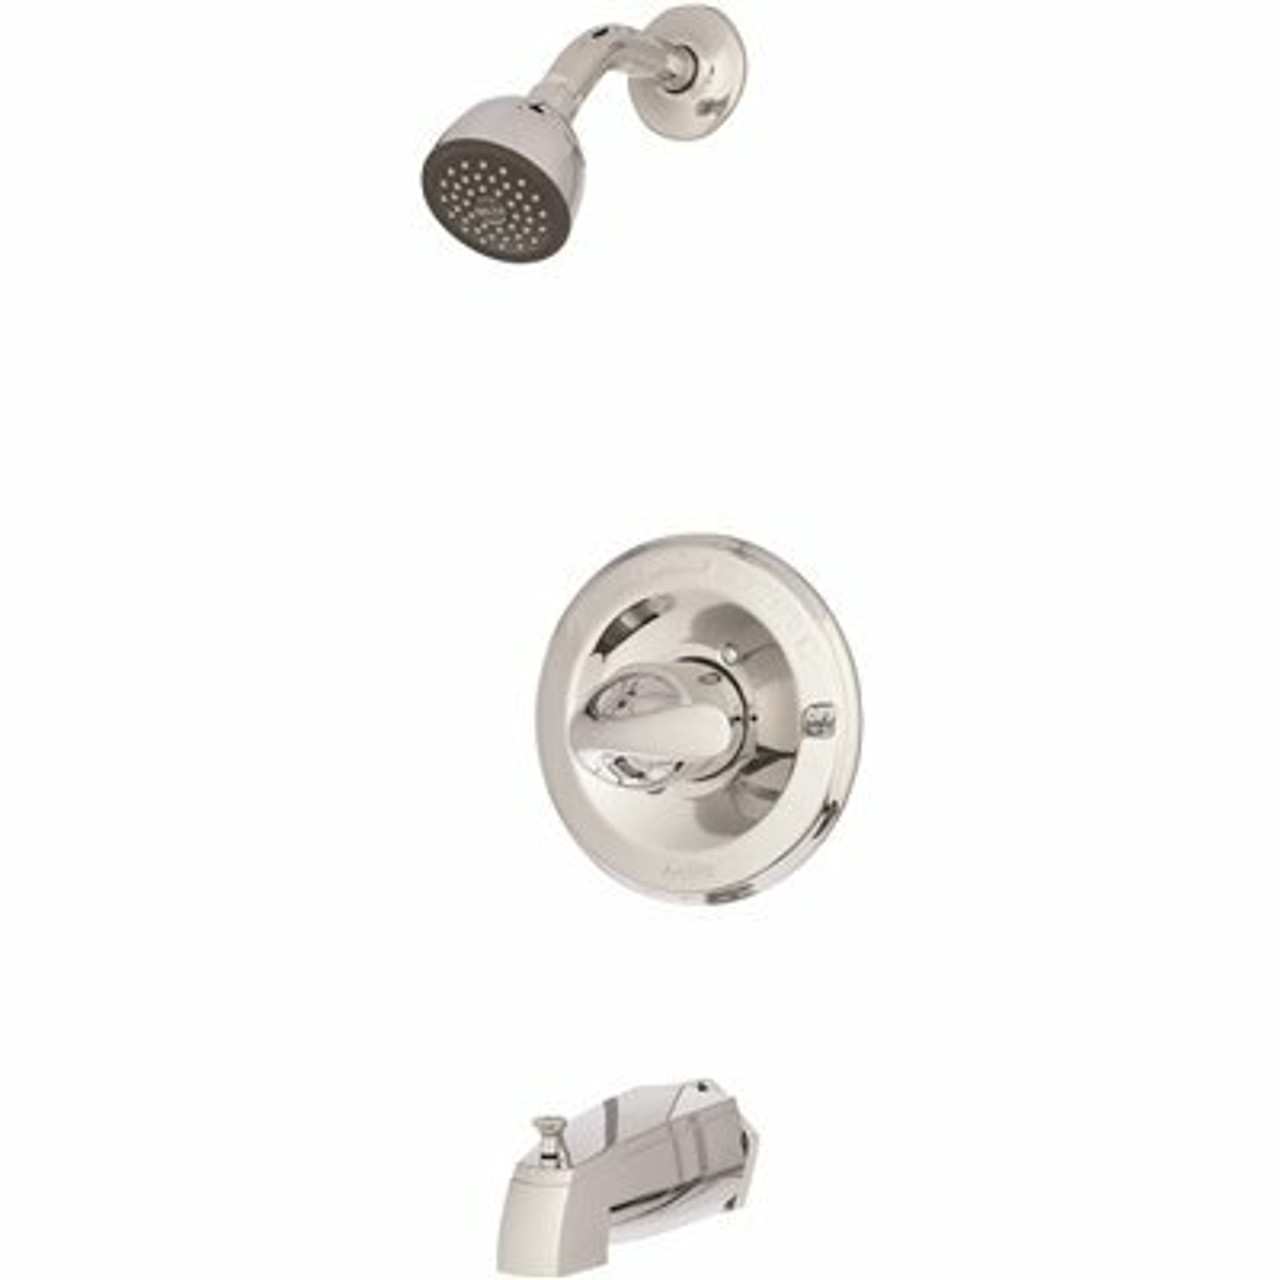 Delta Classic 1-Handle Wall Mount Tub And Shower Faucet Trim Kit In Chrome (Valve Not Included)